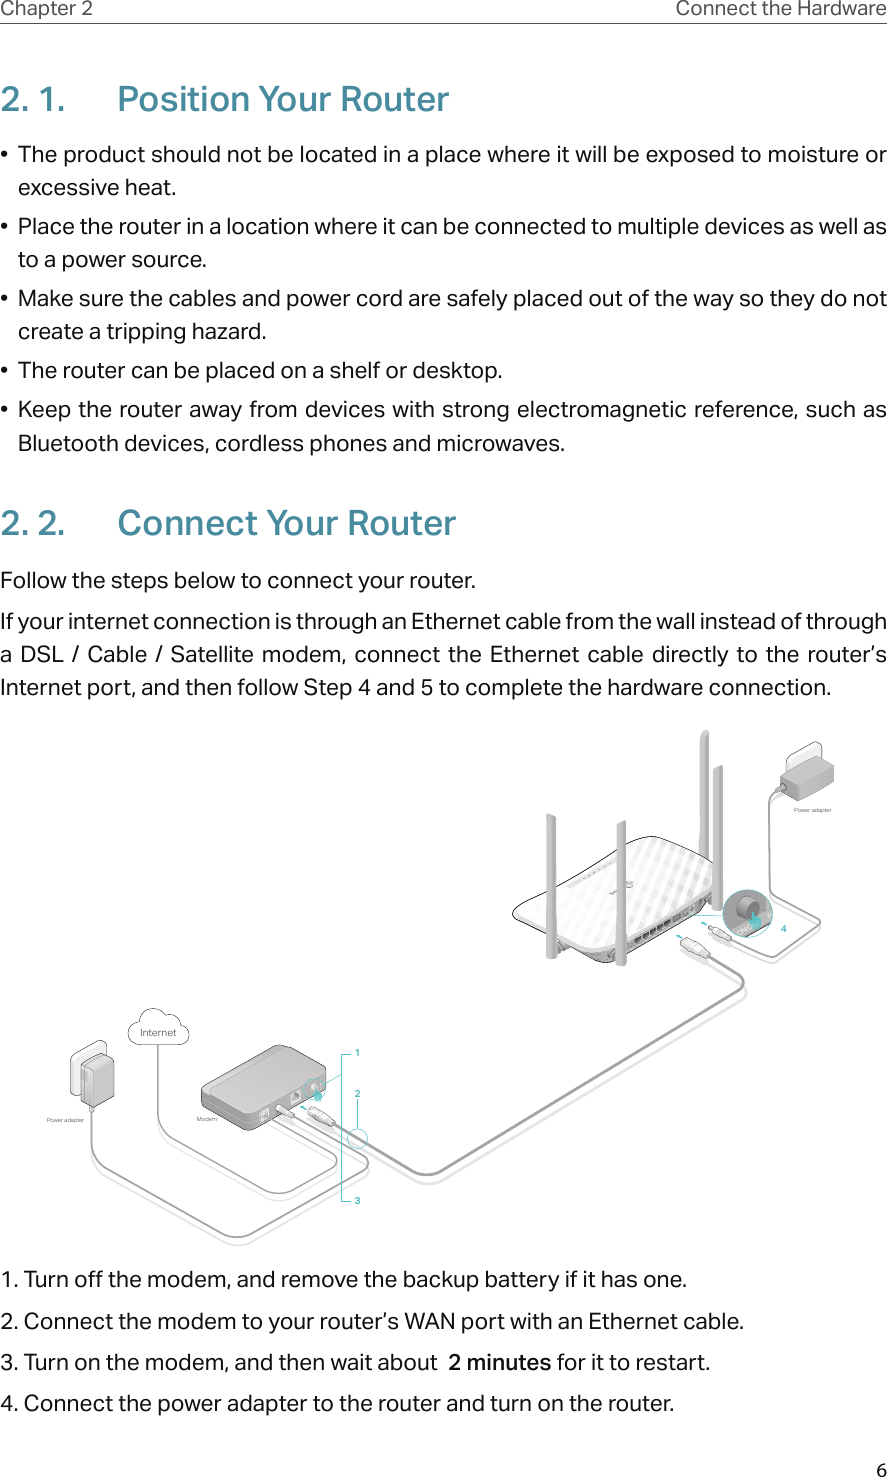 6Chapter 2 Connect the Hardware2. 1.  Position Your Router•  The product should not be located in a place where it will be exposed to moisture or excessive heat.•  Place the router in a location where it can be connected to multiple devices as well as to a power source.•  Make sure the cables and power cord are safely placed out of the way so they do not create a tripping hazard.•  The router can be placed on a shelf or desktop.•  Keep the router away from devices with strong electromagnetic reference, such as Bluetooth devices, cordless phones and microwaves.2. 2.  Connect Your RouterFollow the steps below to connect your router.If your internet connection is through an Ethernet cable from the wall instead of through a  DSL  /  Cable  /  Satellite  modem,  connect  the  Ethernet  cable directly to  the  router’s Internet port, and then follow Step 4 and 5 to complete the hardware connection.ModemPower adapterPower adapterInternet4123WiFi/WPSRESET LAN4 LAN3LAN2LAN1 WAN USB  ON/OFF POWER ON/OFF POWER ON/OFF ON/OFF ON/OFF ON/OFF ON/OFF ON/OFF ON/OFF ON/OFF1. Turn off the modem, and remove the backup battery if it has one.2. Connect the modem to your router’s WAN port with an Ethernet cable.3. Turn on the modem, and then wait about  2 minutes for it to restart.4. Connect the power adapter to the router and turn on the router.